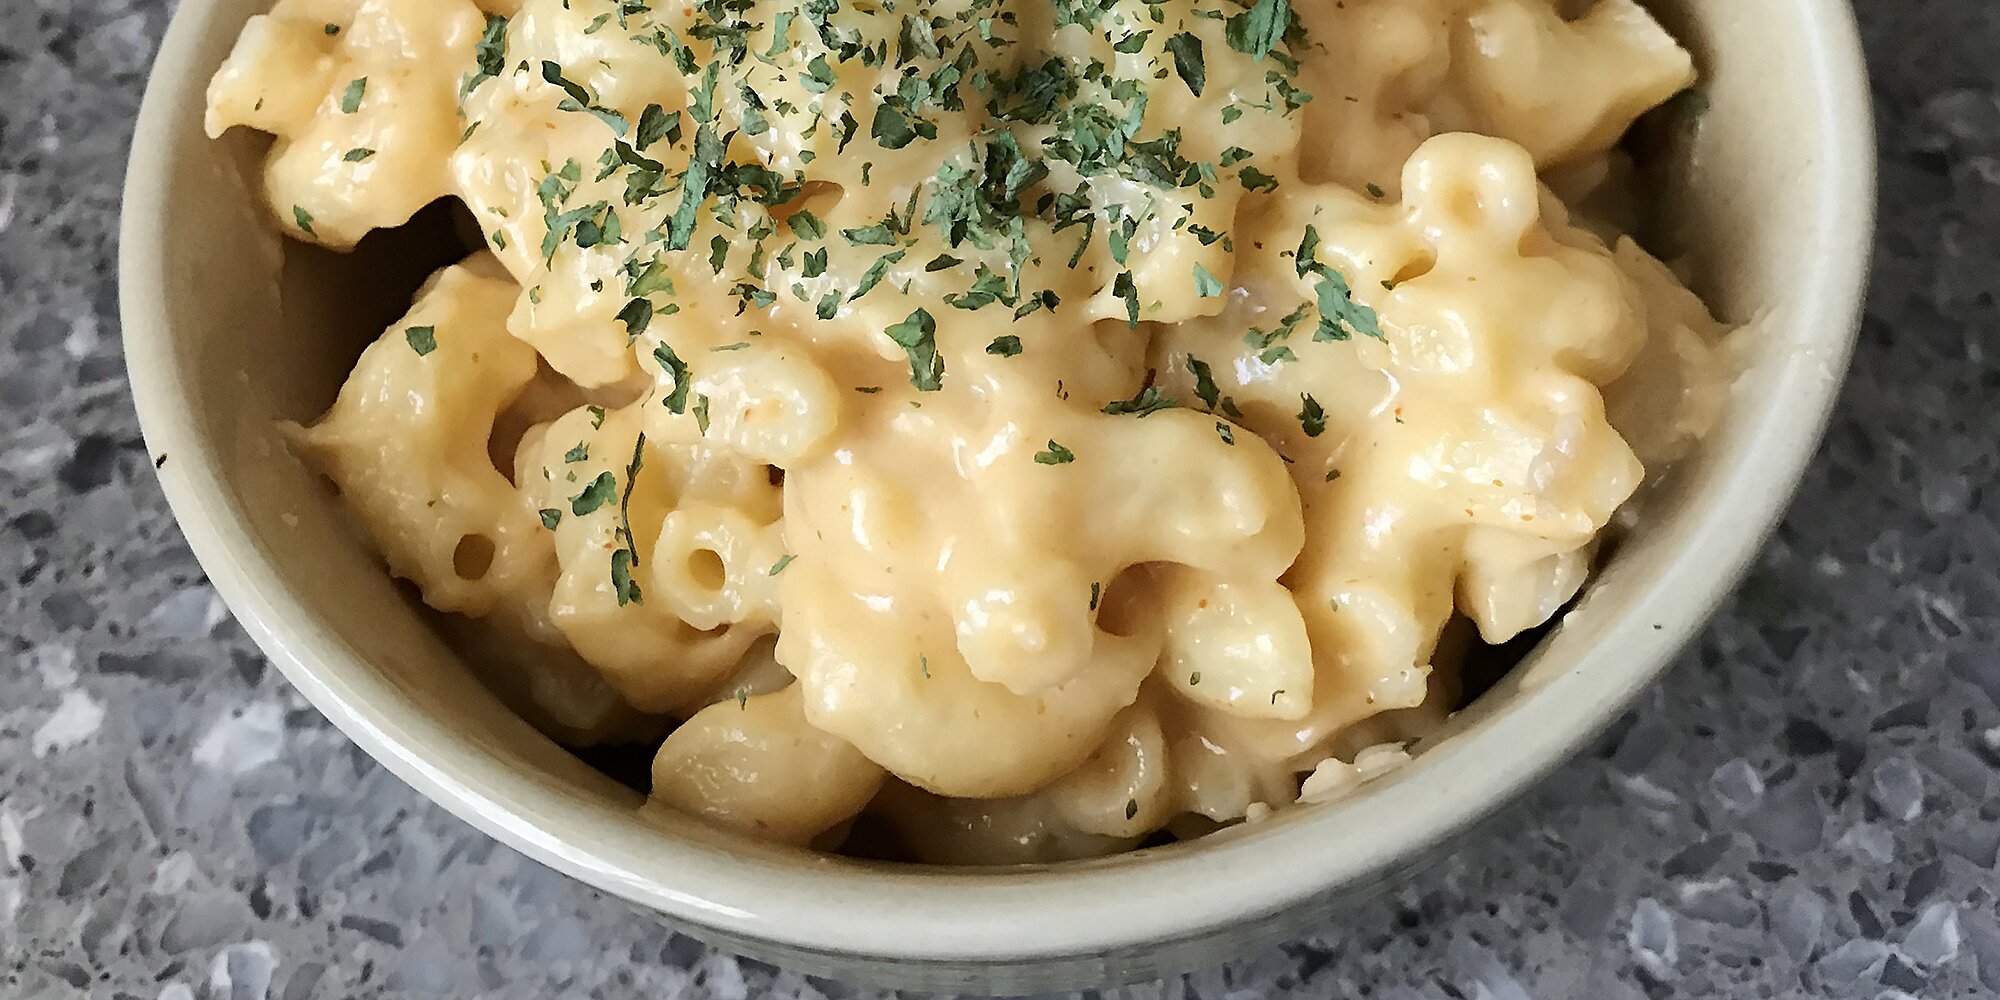 How do you make mac and cheese from scratch?